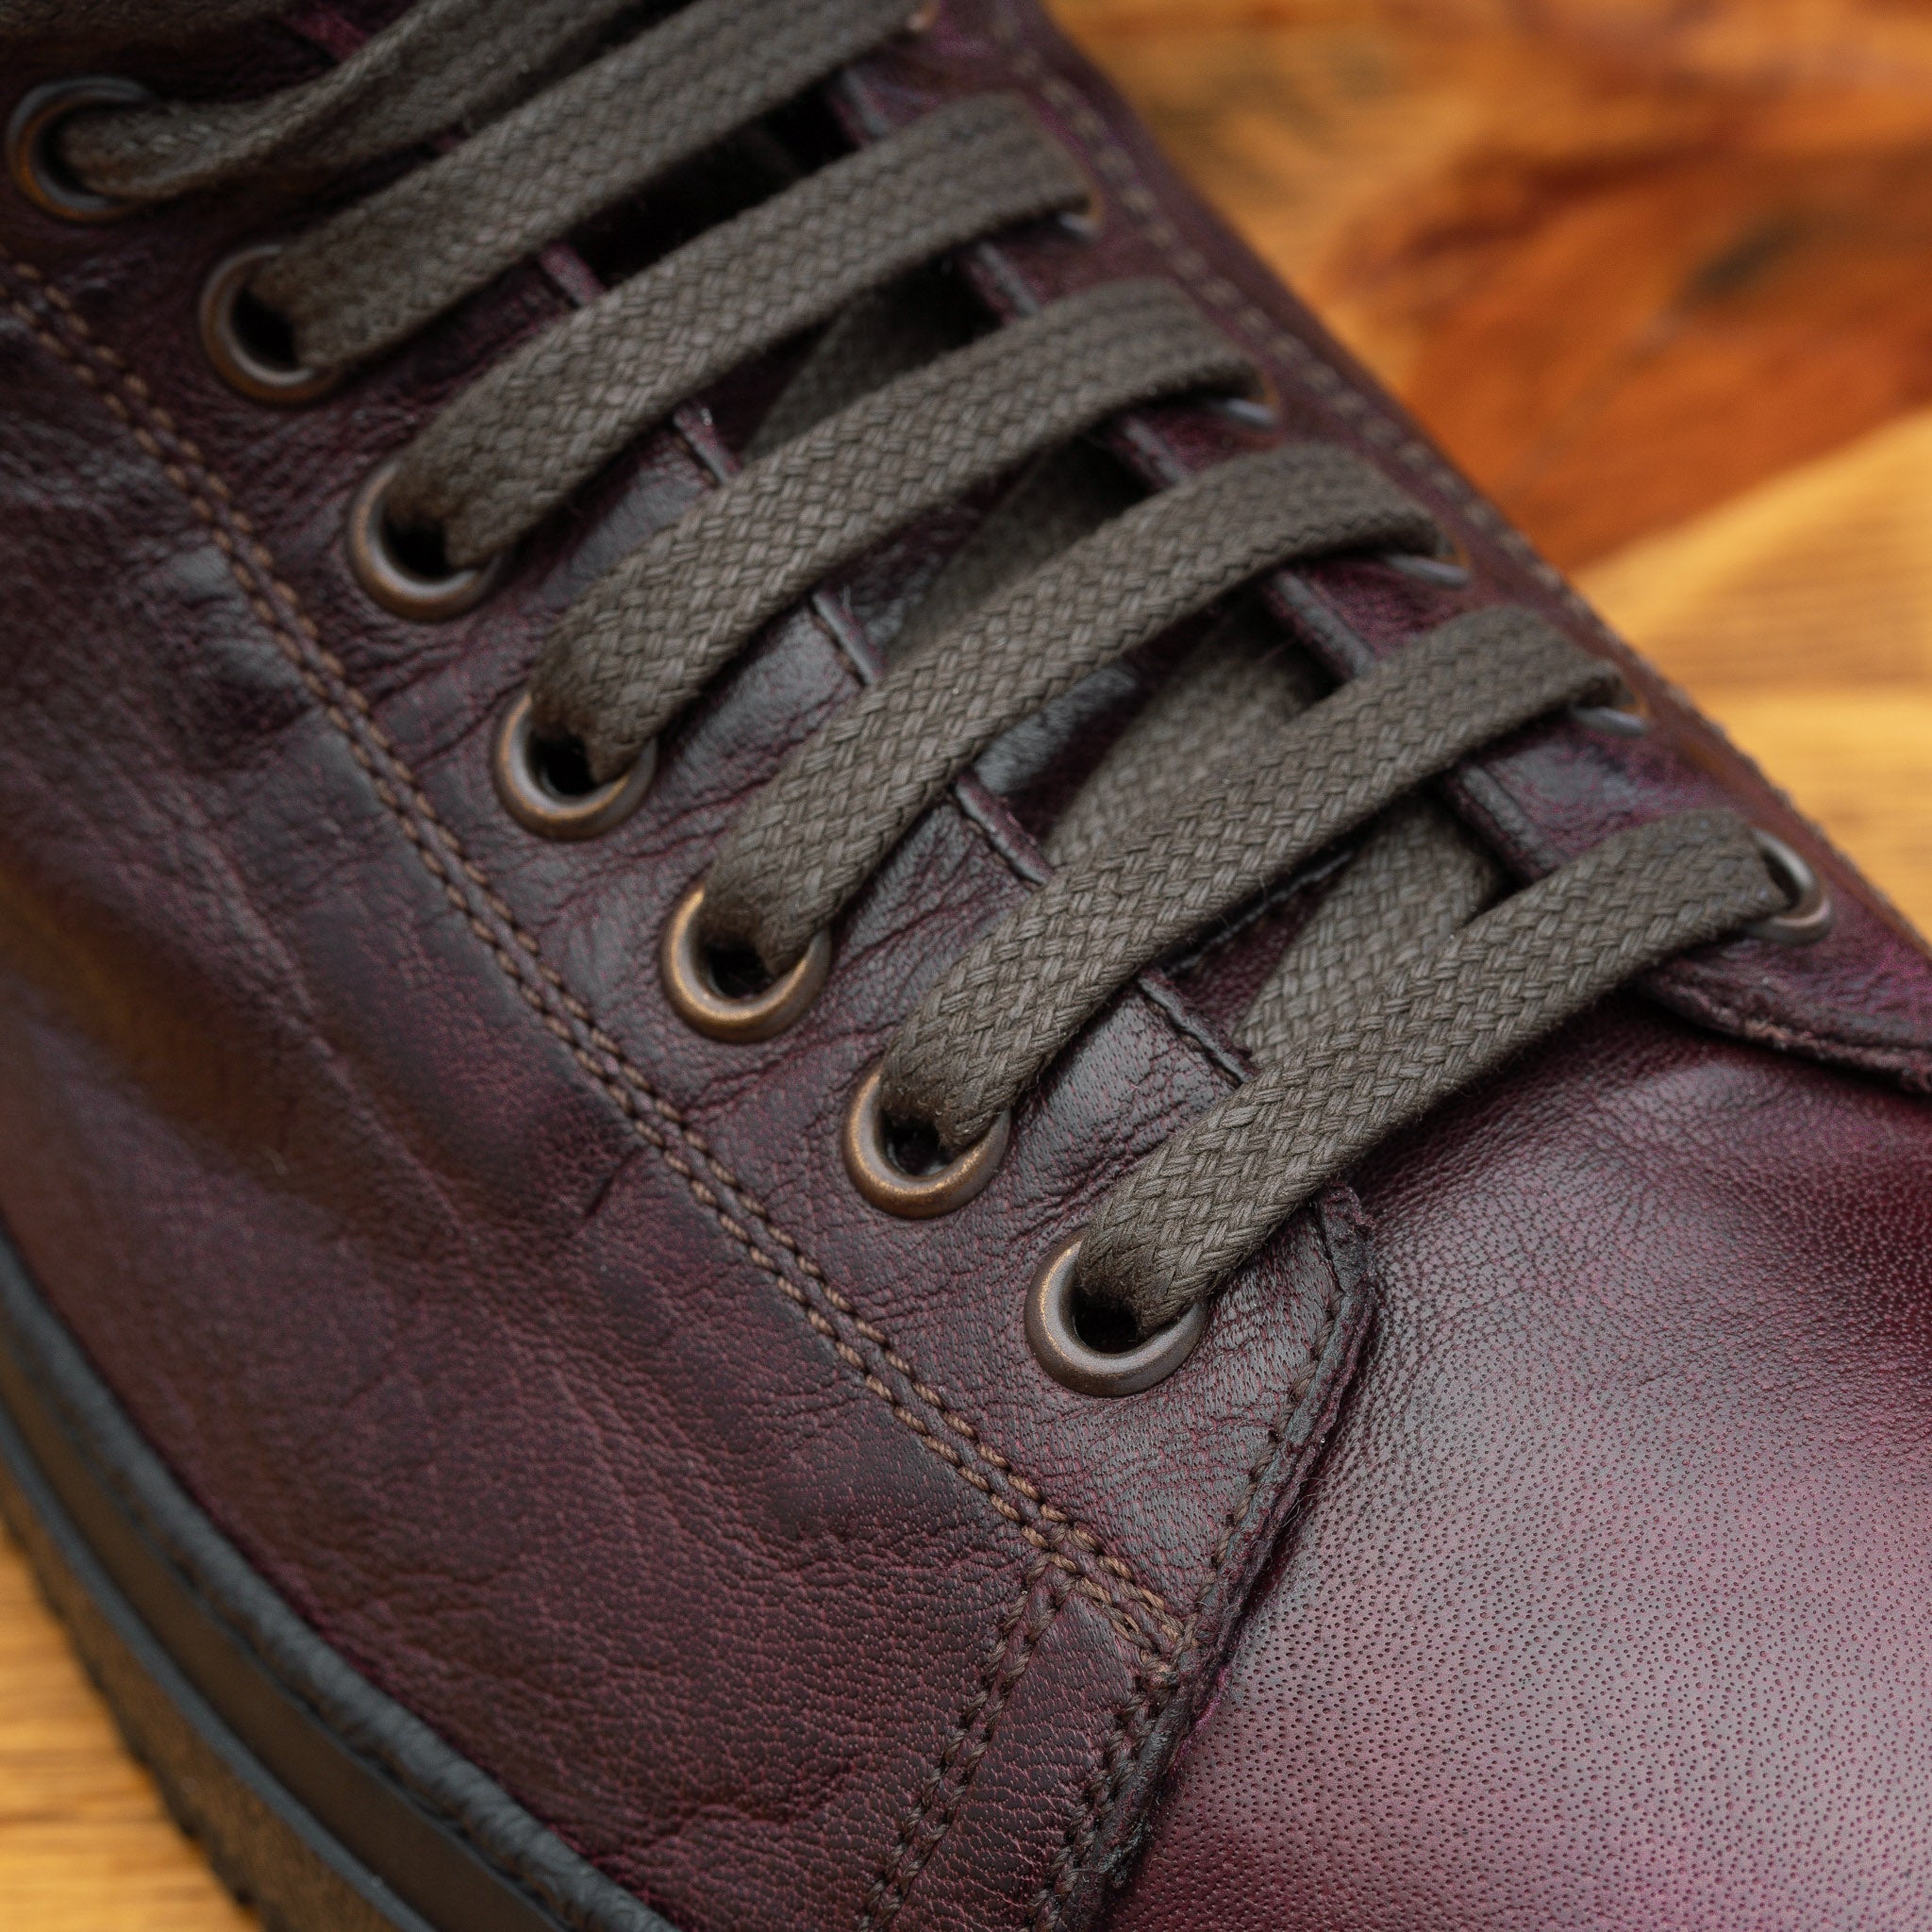 Up close picture of the vamp showing the 10 eyelet of H883 Calzoleria Toscana Liver High Top Benso Sneaker